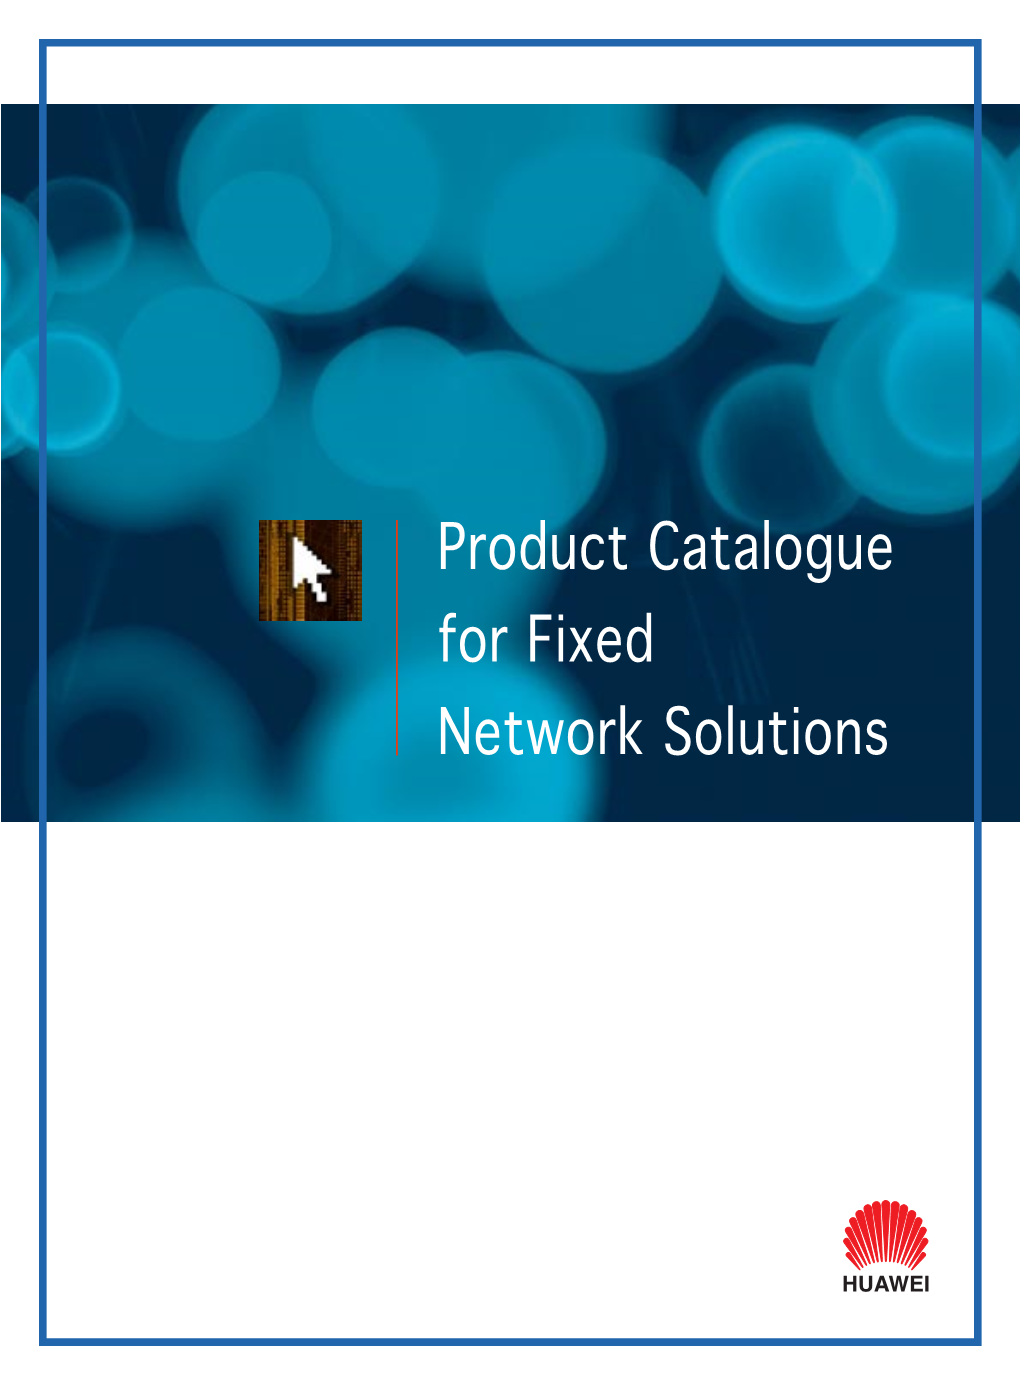 Product Catalogue for Fixed Network Solutions